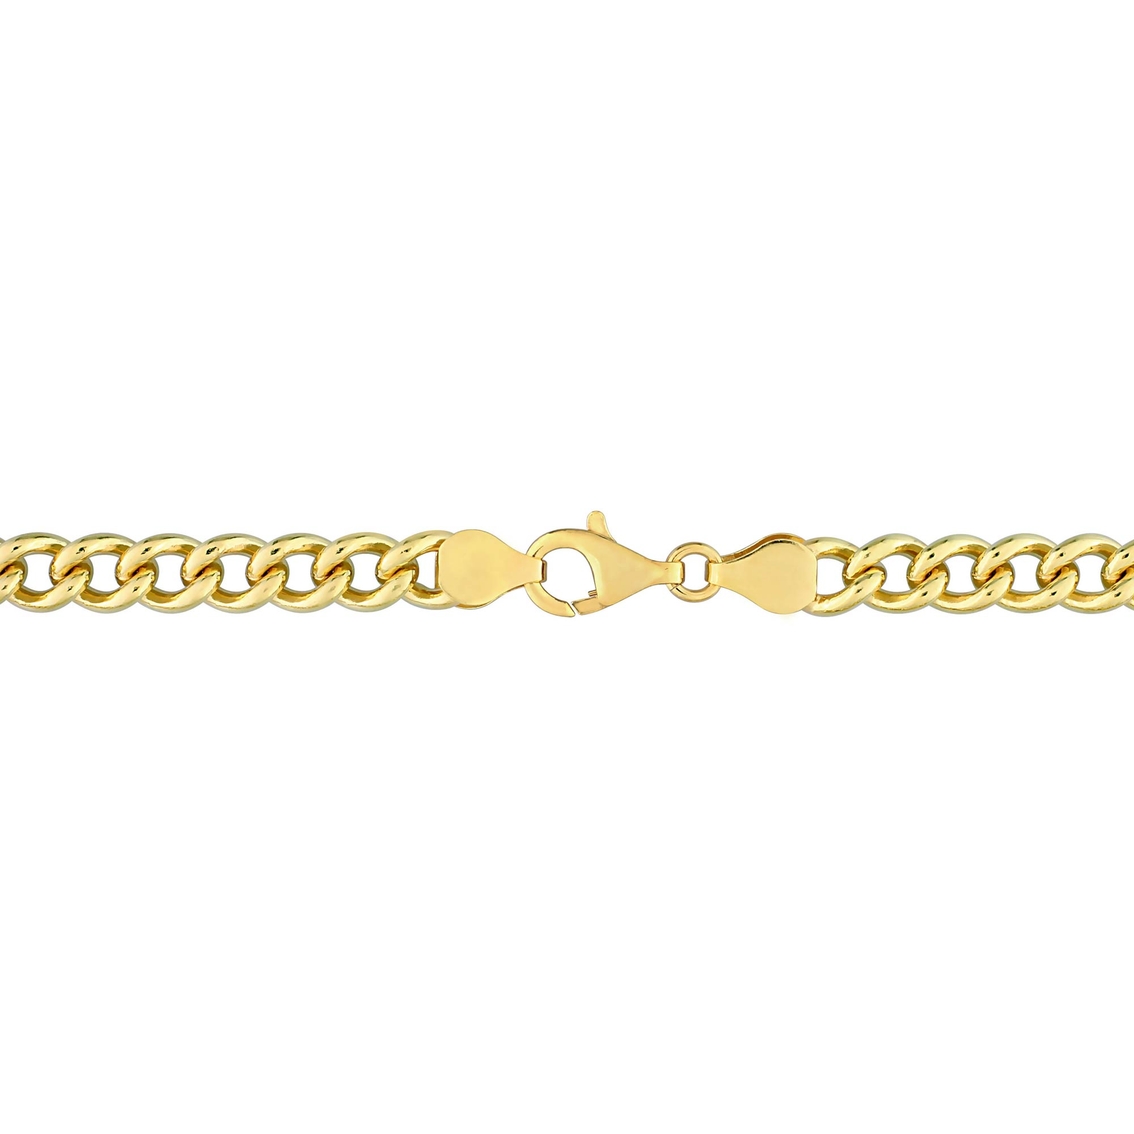 Sofia B. 18K Yellow Gold Over Sterling Silver 6.5mm Curb Link Chain Bracelet - Image 2 of 2